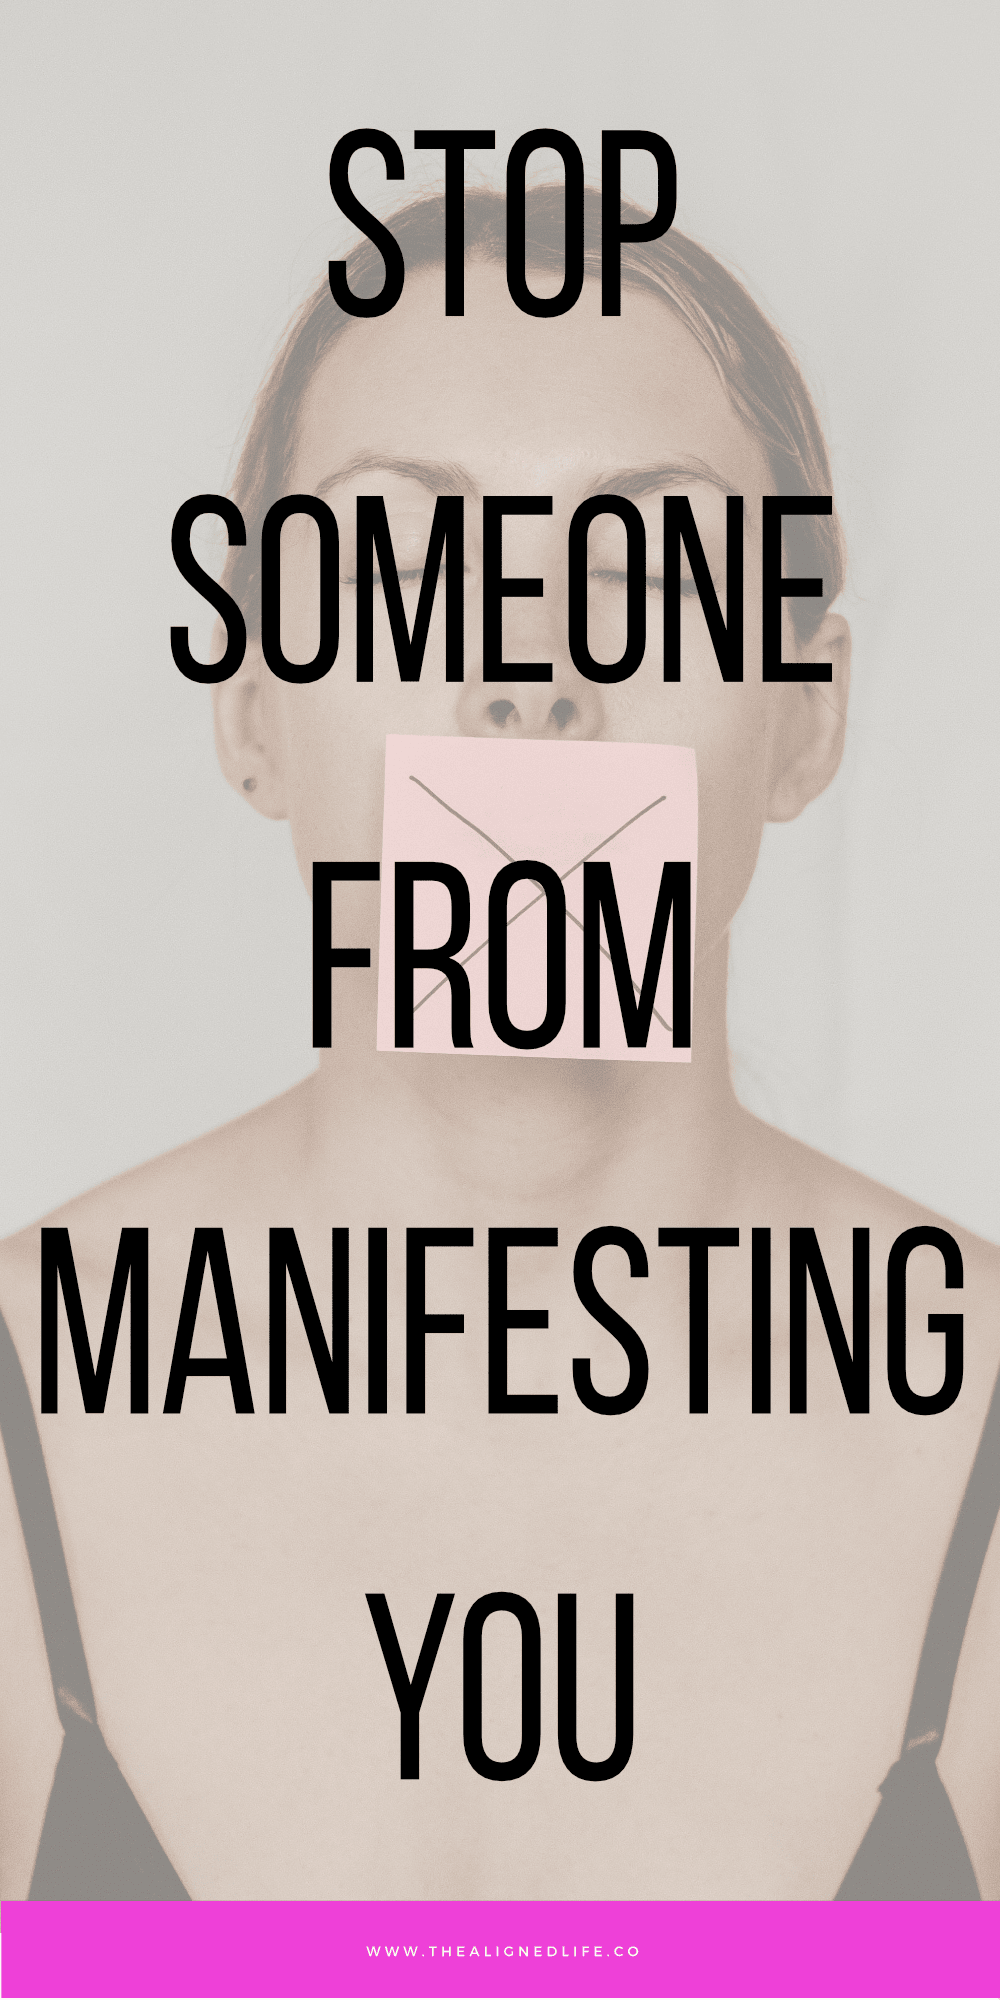 How To Stop Someone From Manifesting You